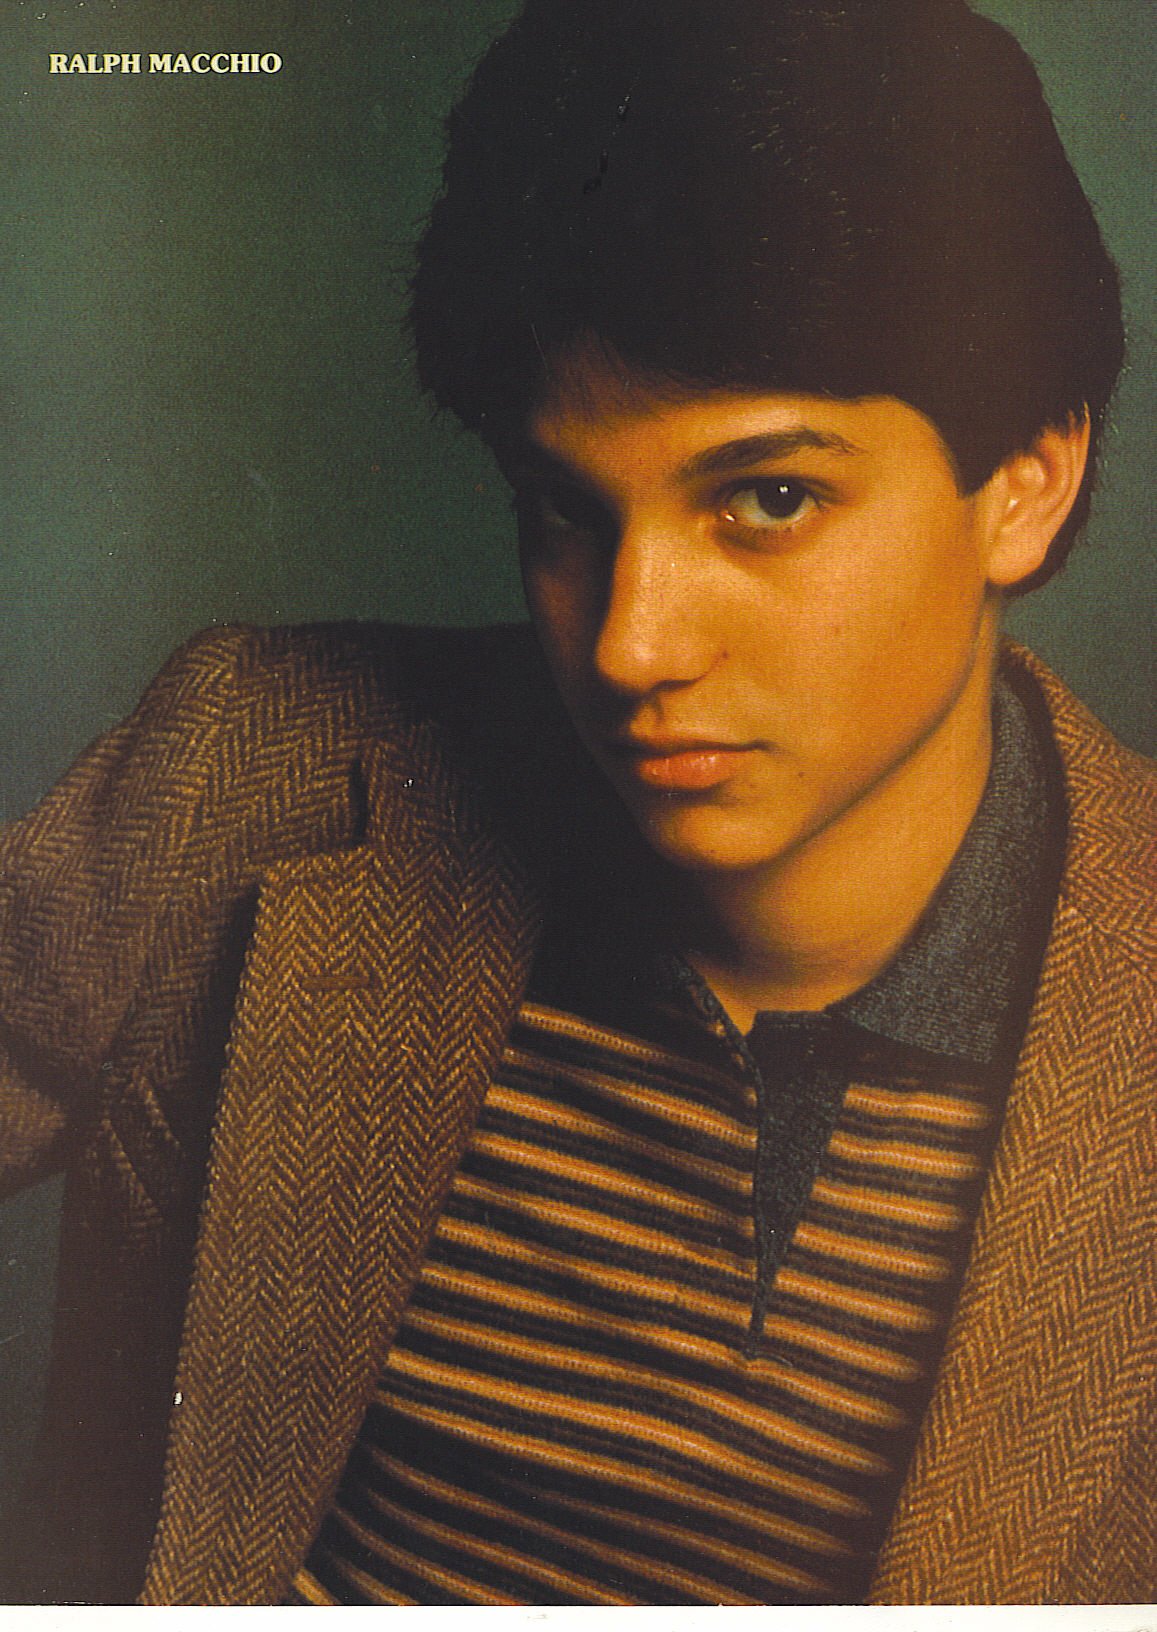 Free download Ralph Macchio image ralph macchio HD wallpaper and background [1157x1632] for your Desktop, Mobile & Tablet. Explore Ralph Macchio Wallpaper. Ralph Macchio Wallpaper, Ralph Lauren Wallpaper, Ralph